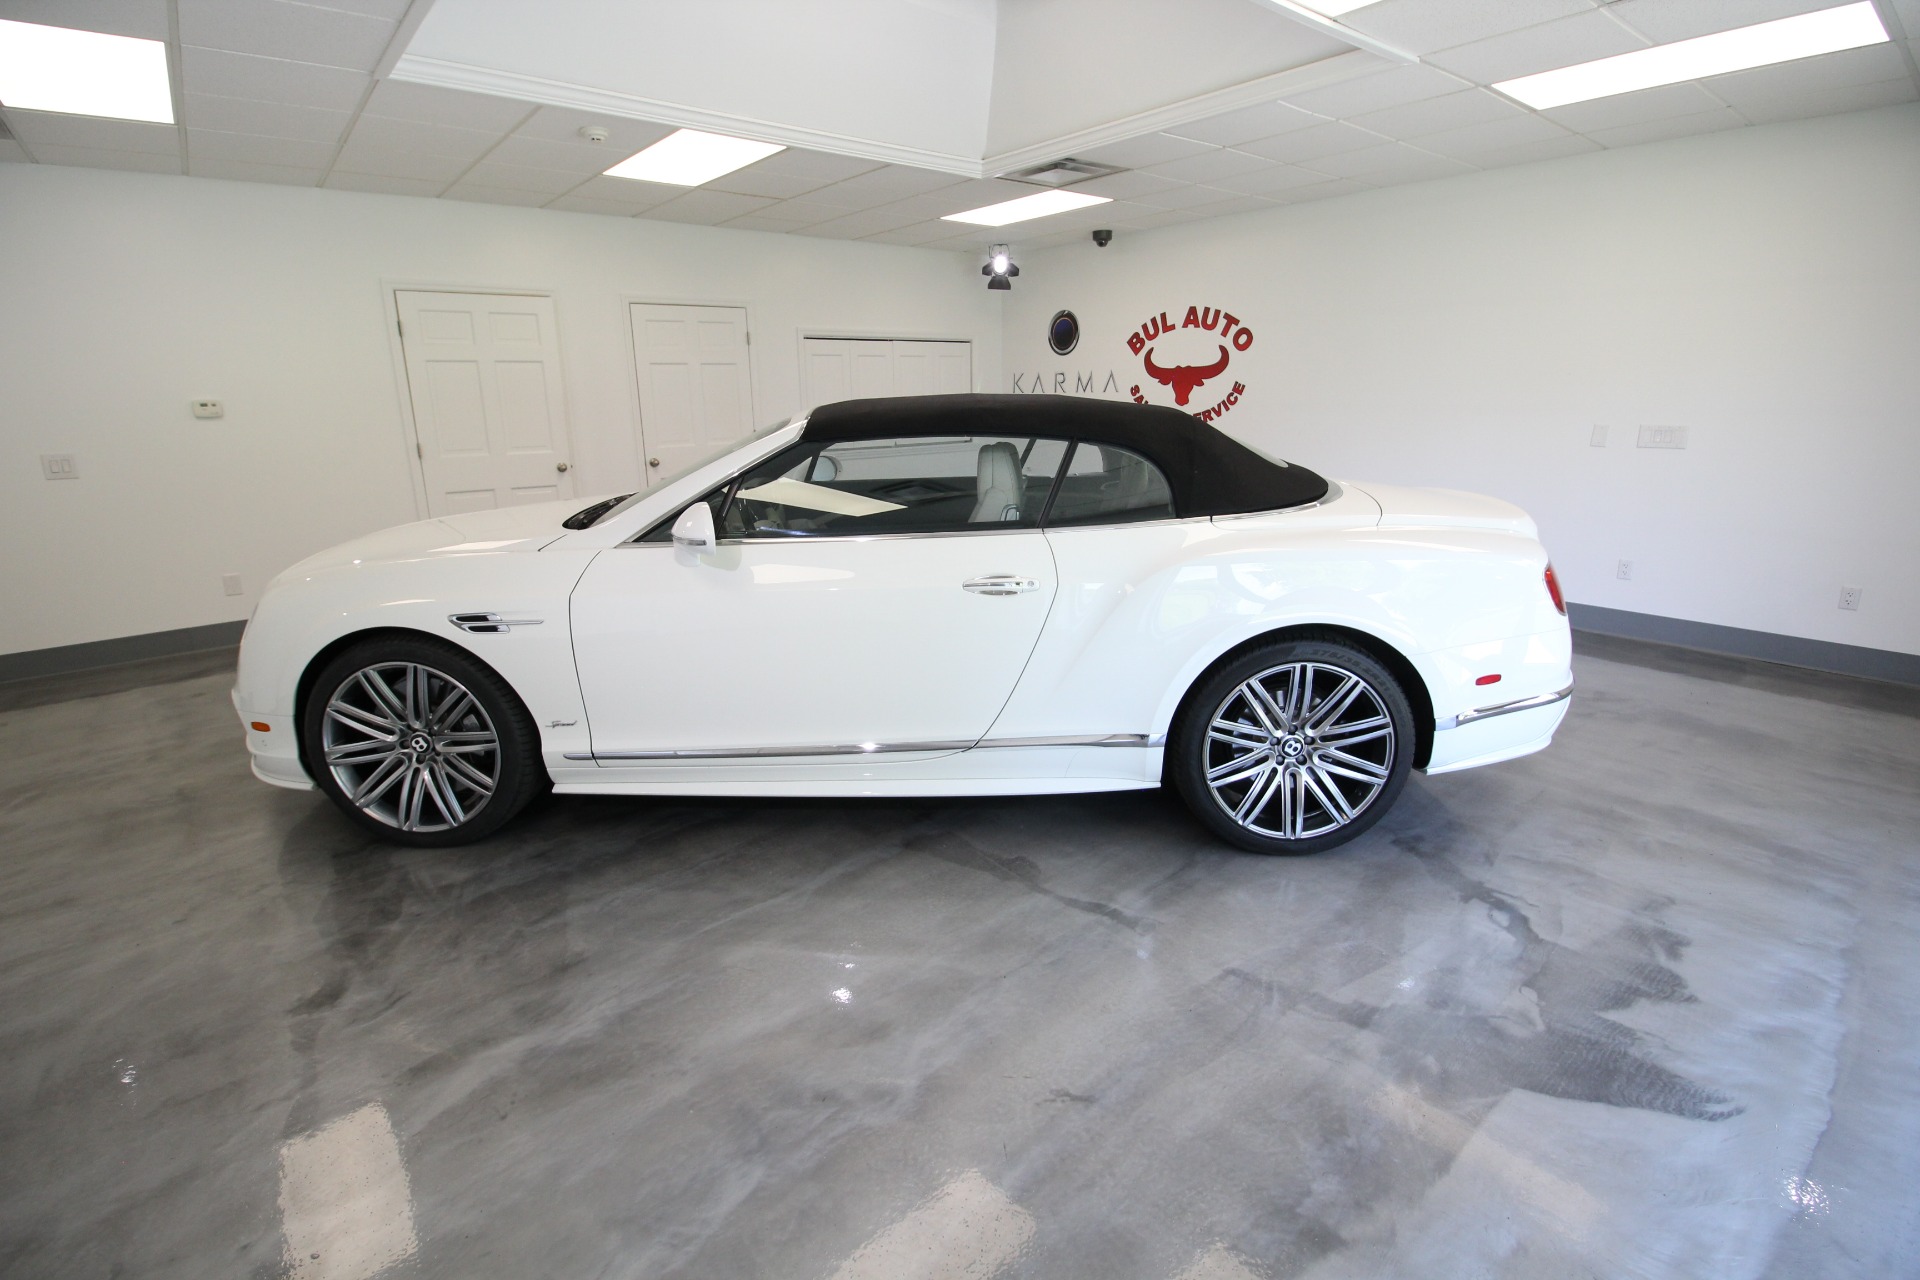 Used 2016 White Bentley Continental GTC Speed W12 SUPERB LOW MILES STUNNING | Albany, NY